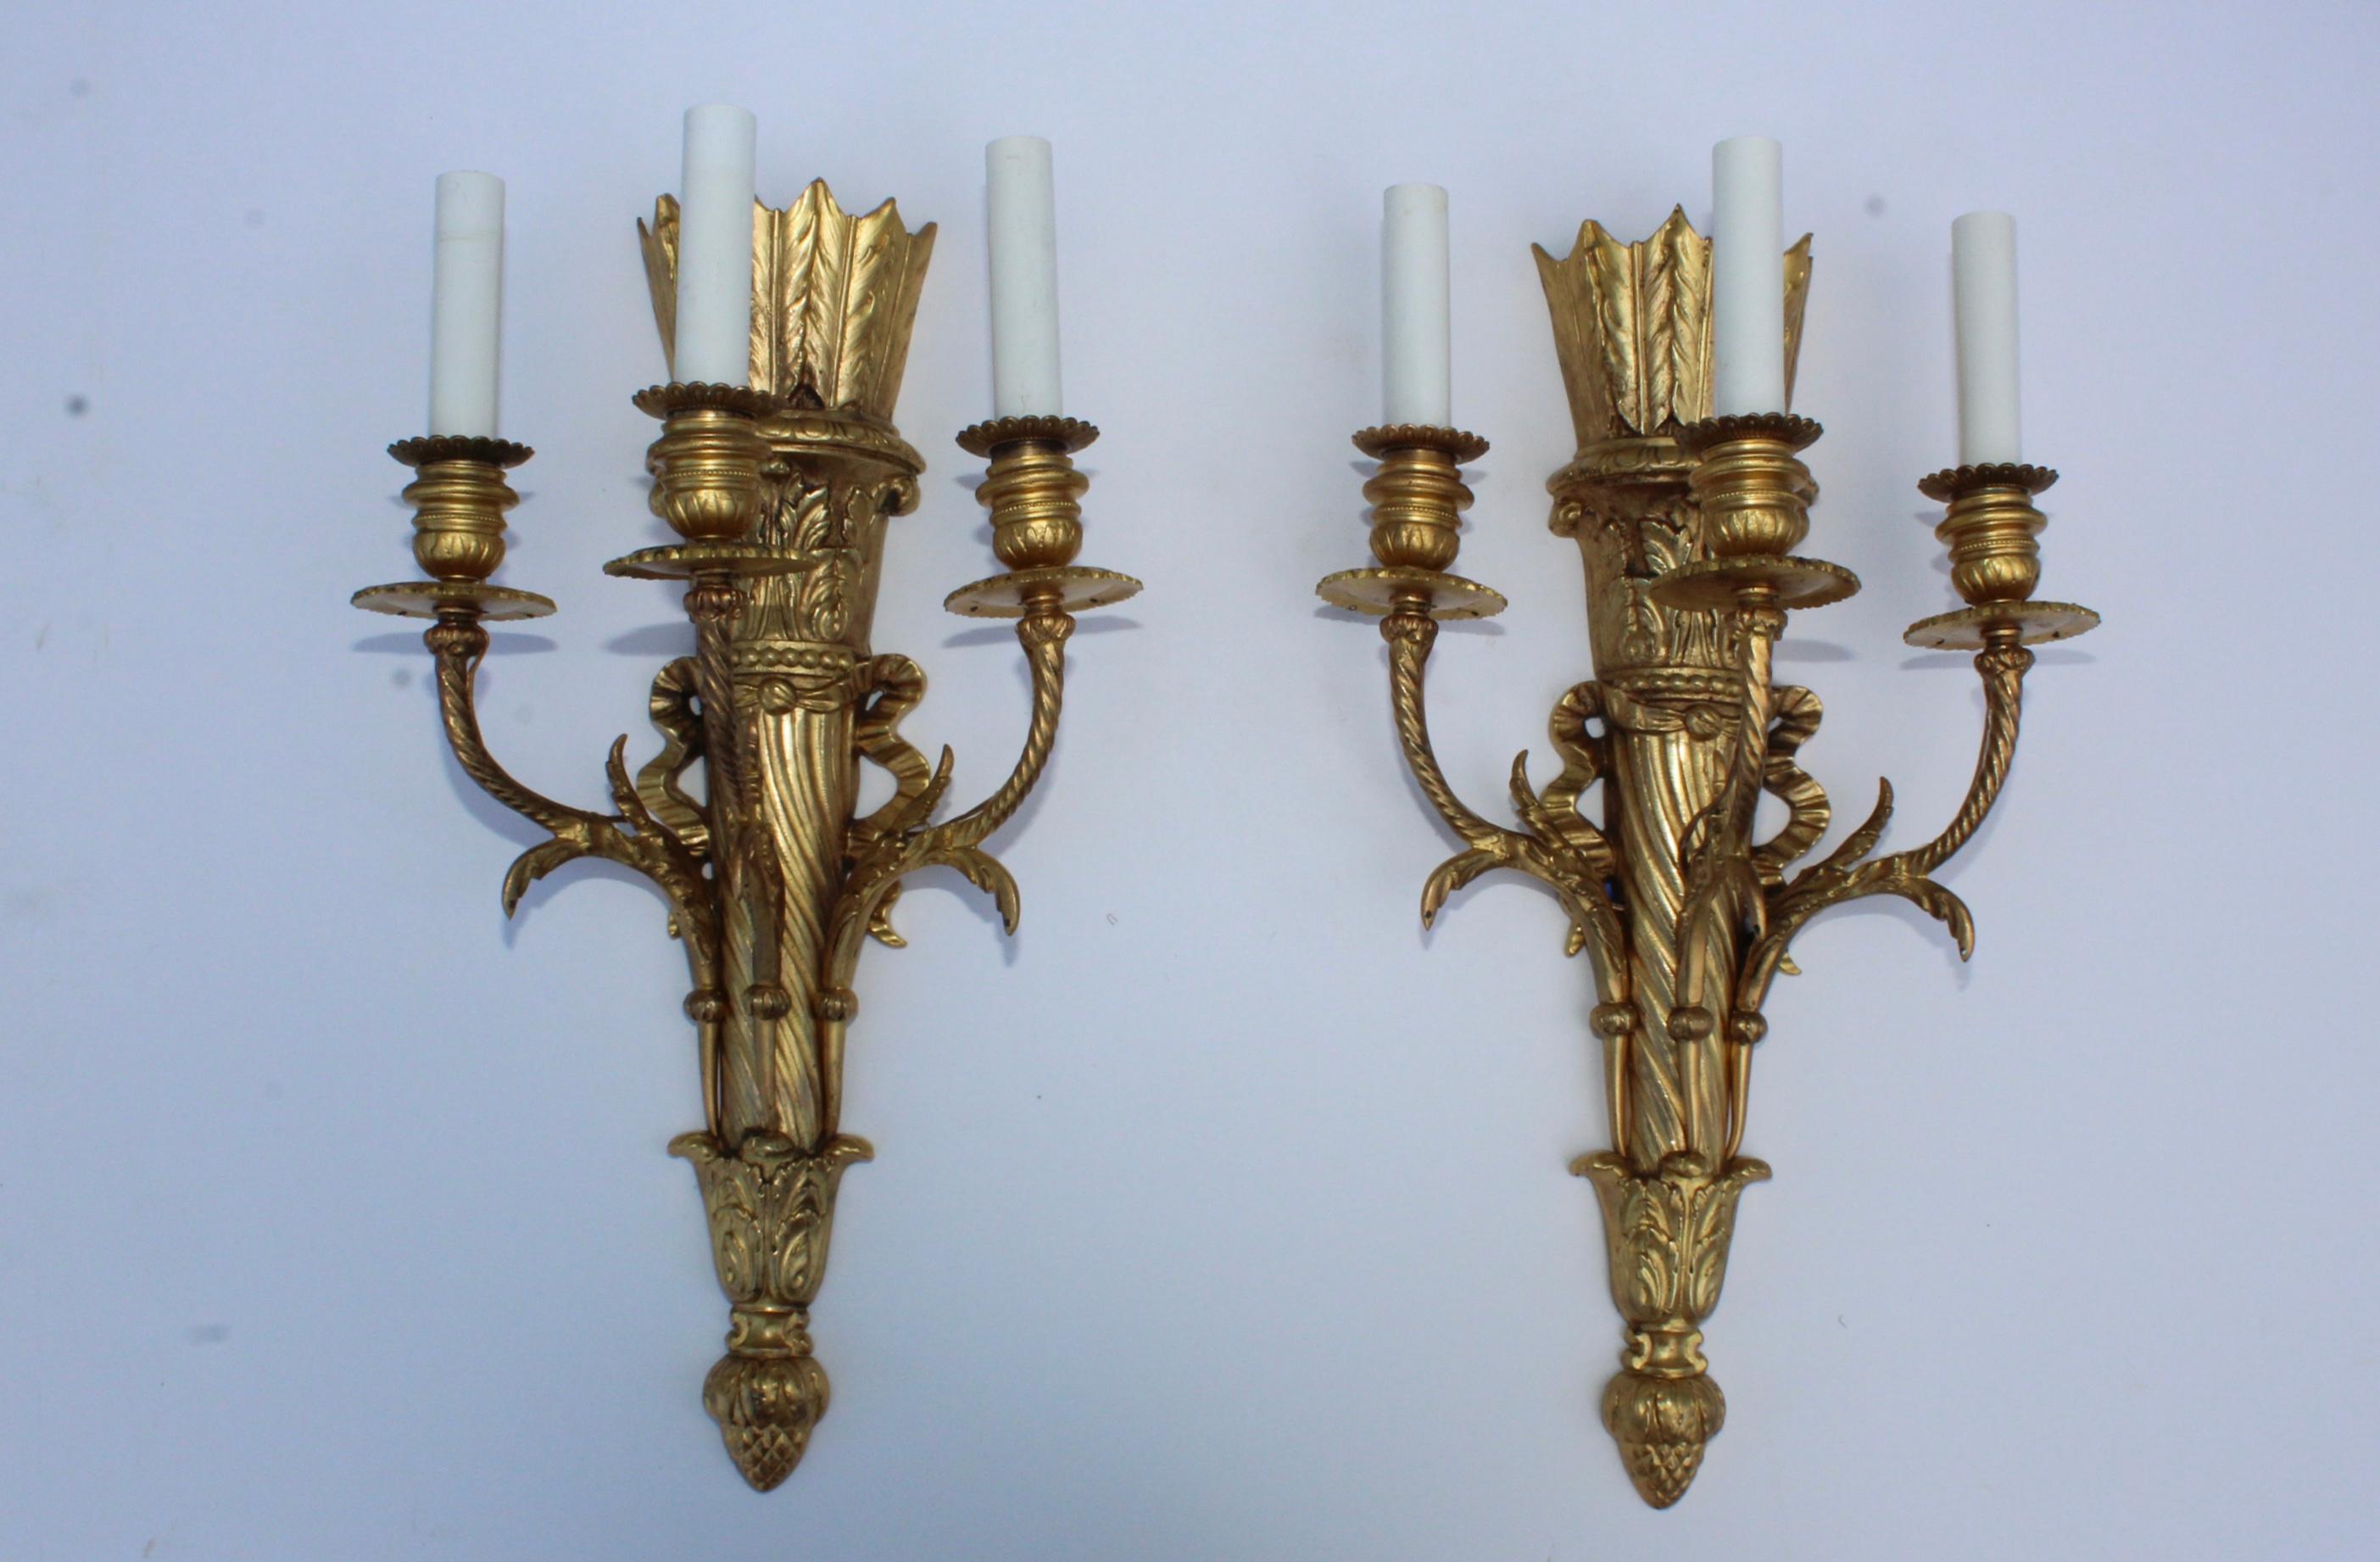 Stunning 1950s French brass gilded sconces.